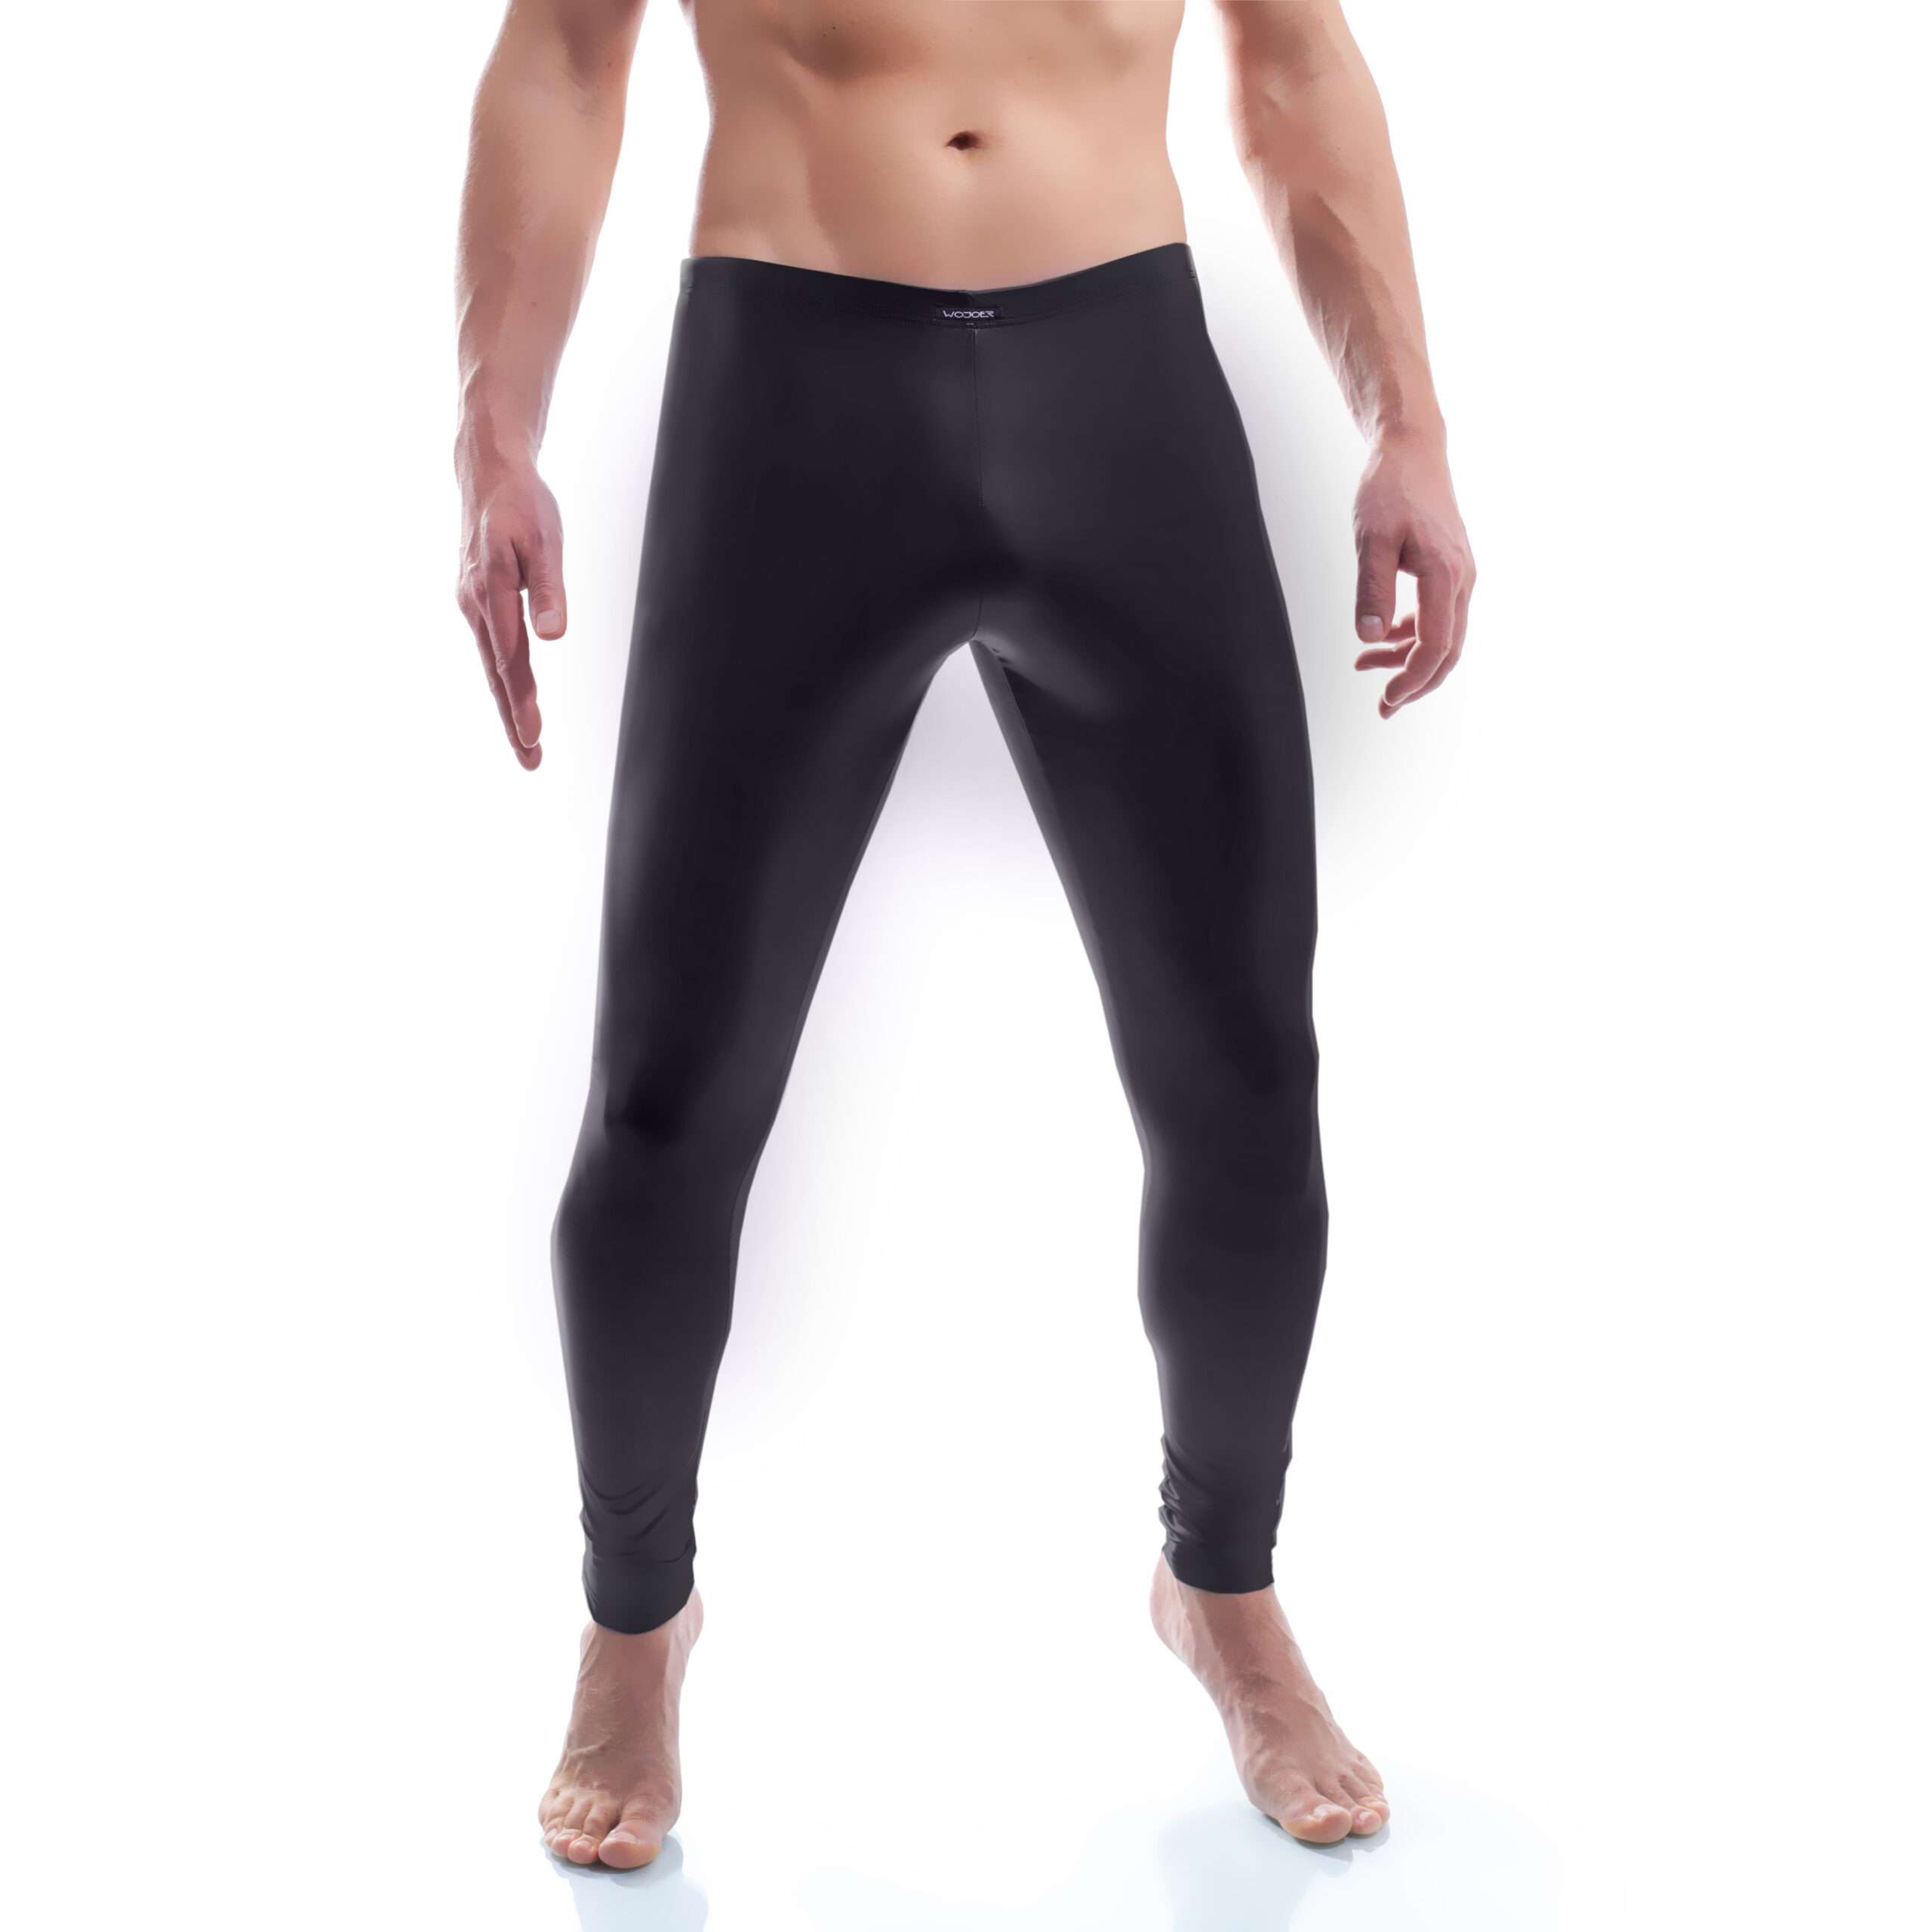 Synlex³ mat swim leggings belongs to the Wojoer LIVE-products. And will be produced on demand.
Sizes
S, M, L, XL, XXL, XXXL
Material
Synlex³: 53% polyamide |6% spandex | 41% polyurethane

Badedeulxe edging: 80% polyamide | 20% spandex
Specials
LIVE Product | stretchy material | skinny |…